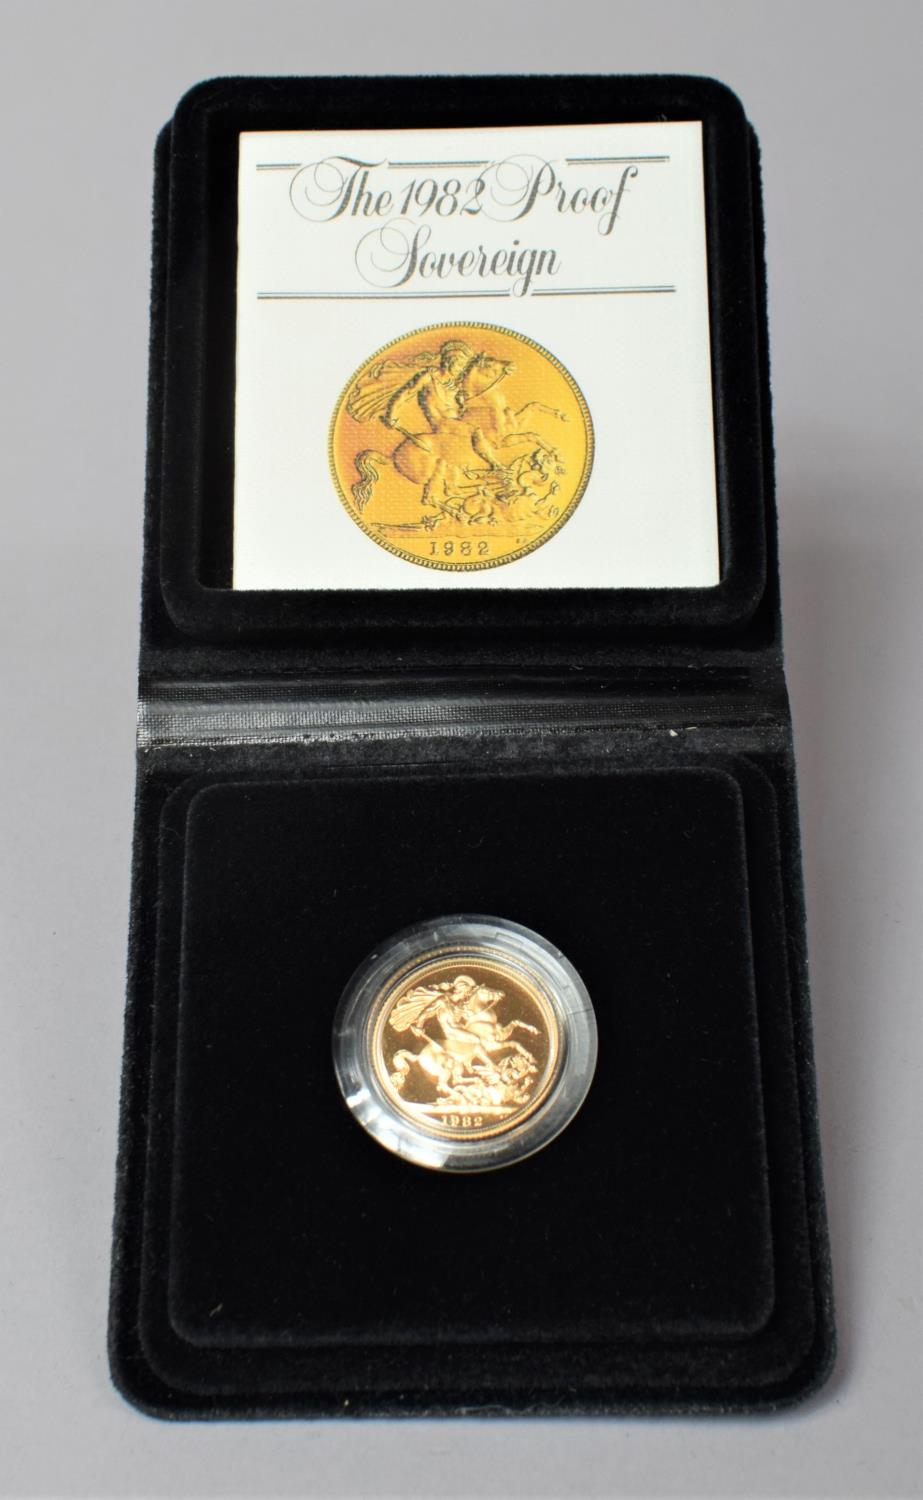 A 1982 Proof Sovereign In Royal Mint Presentation Case